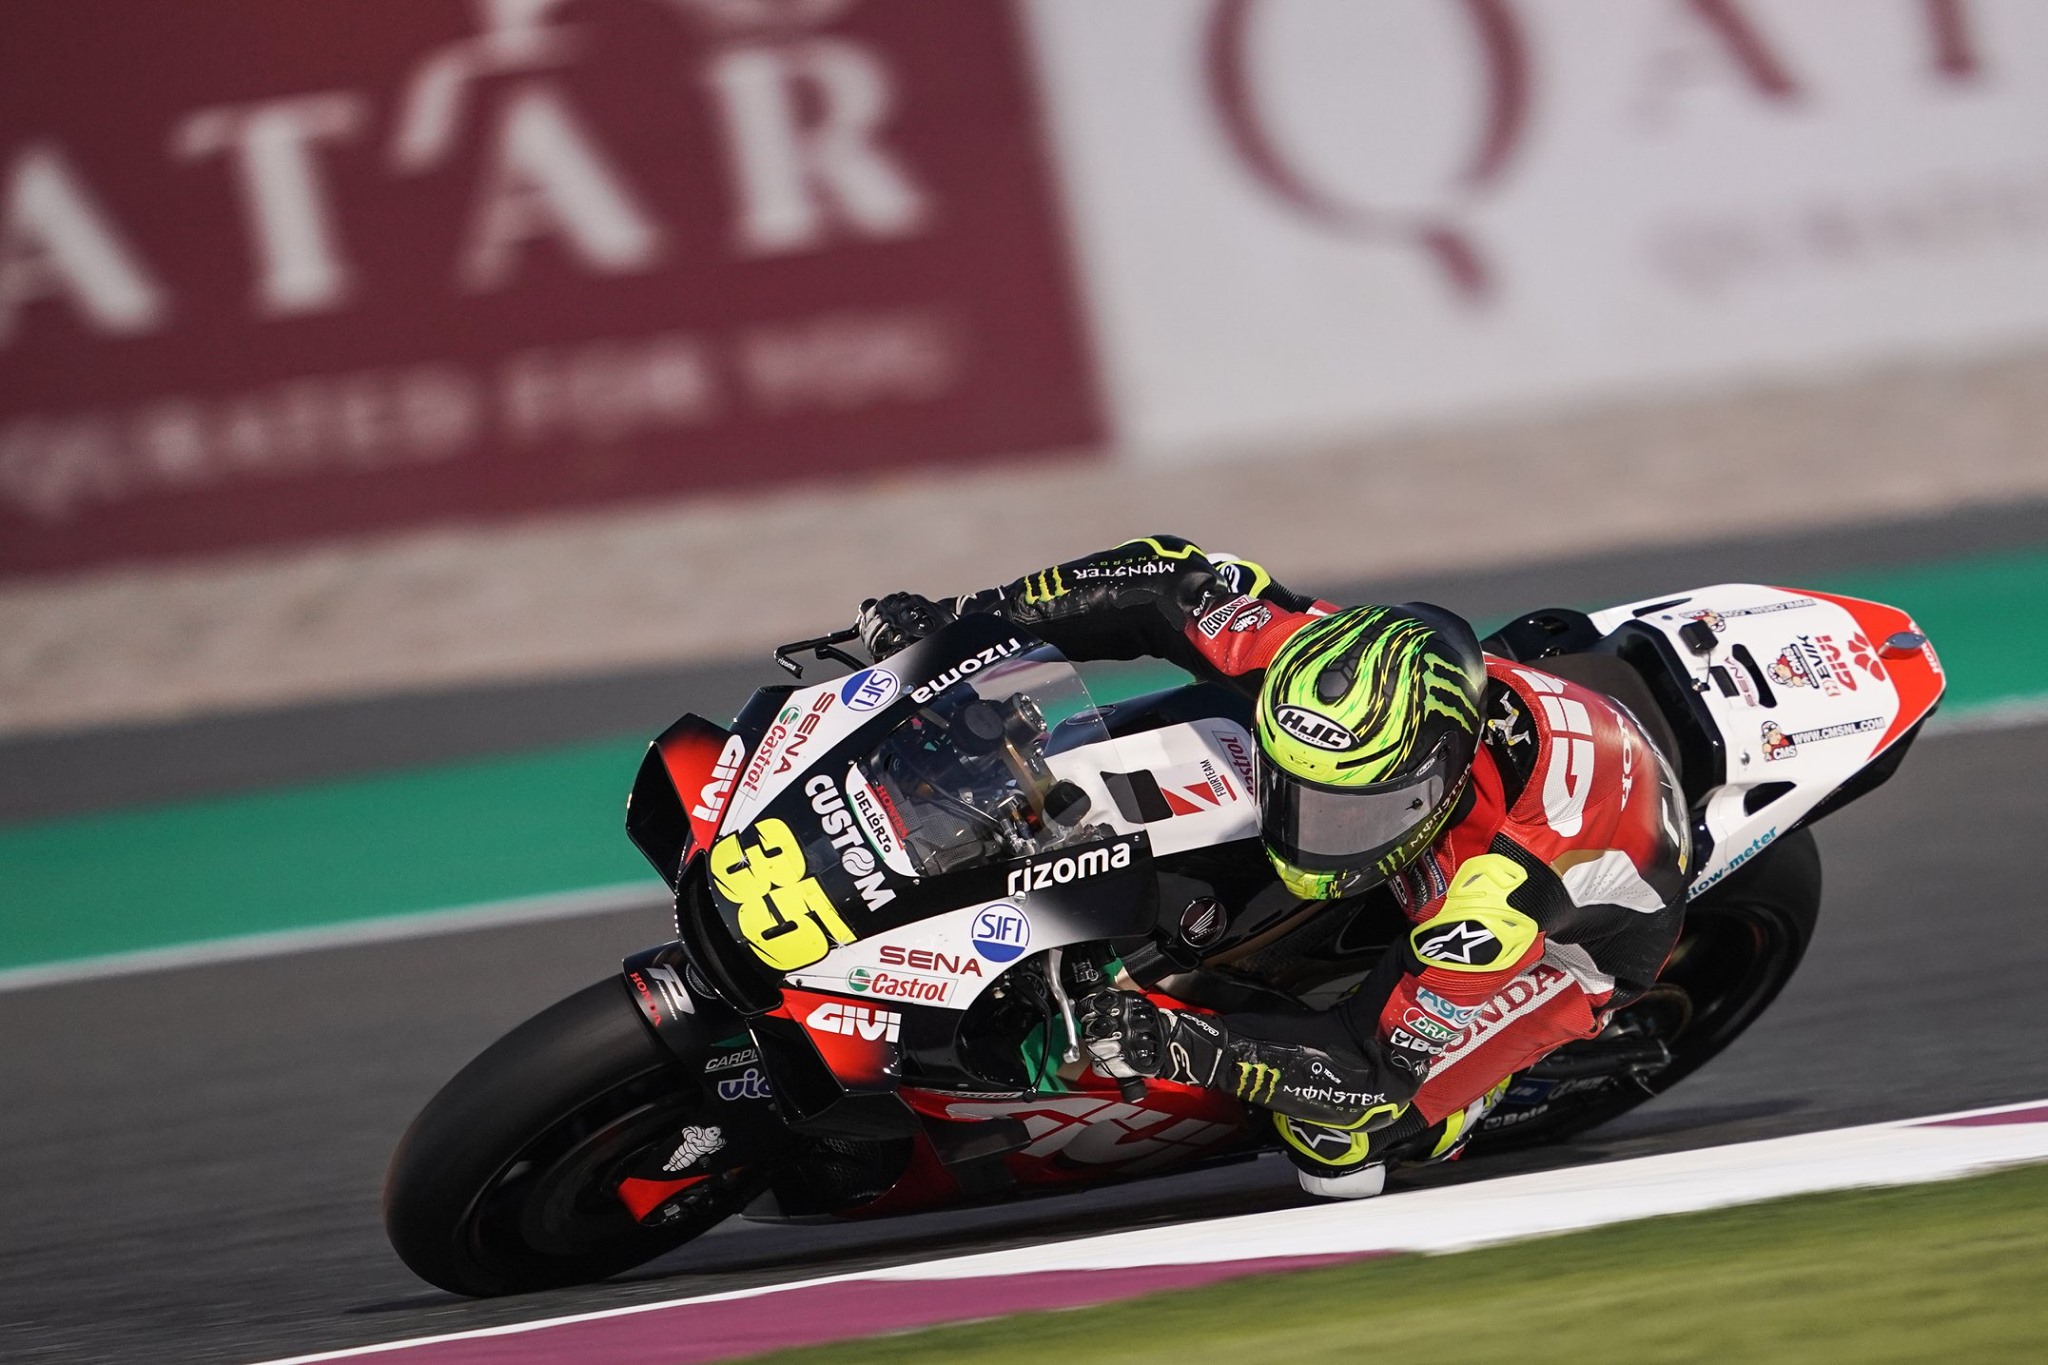 Turn two spill brings early end to 2nd day of testing for Crutchlow